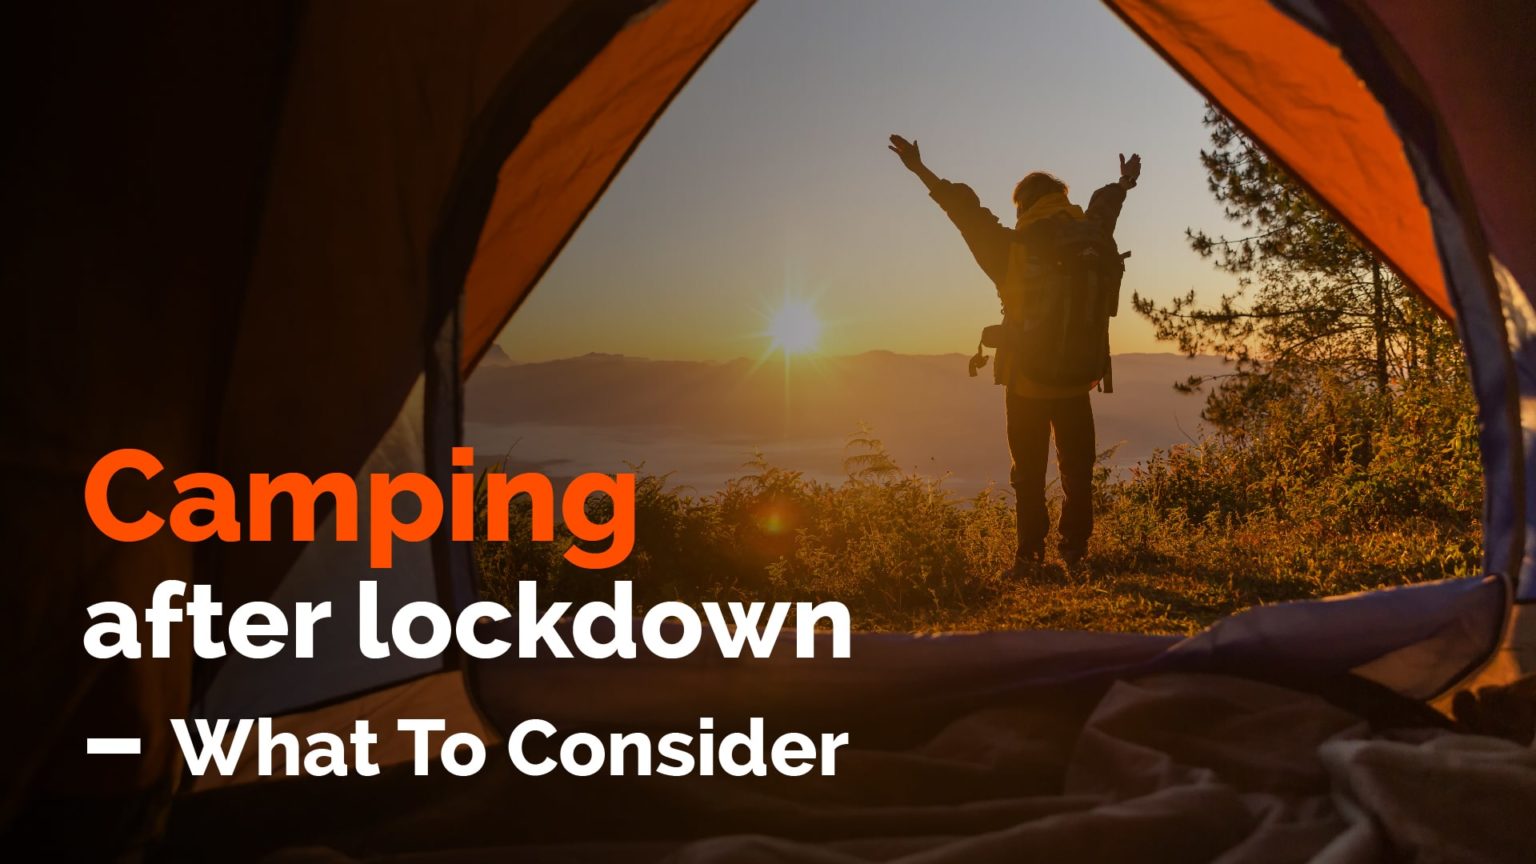 Camping after lockdown – What To Consider